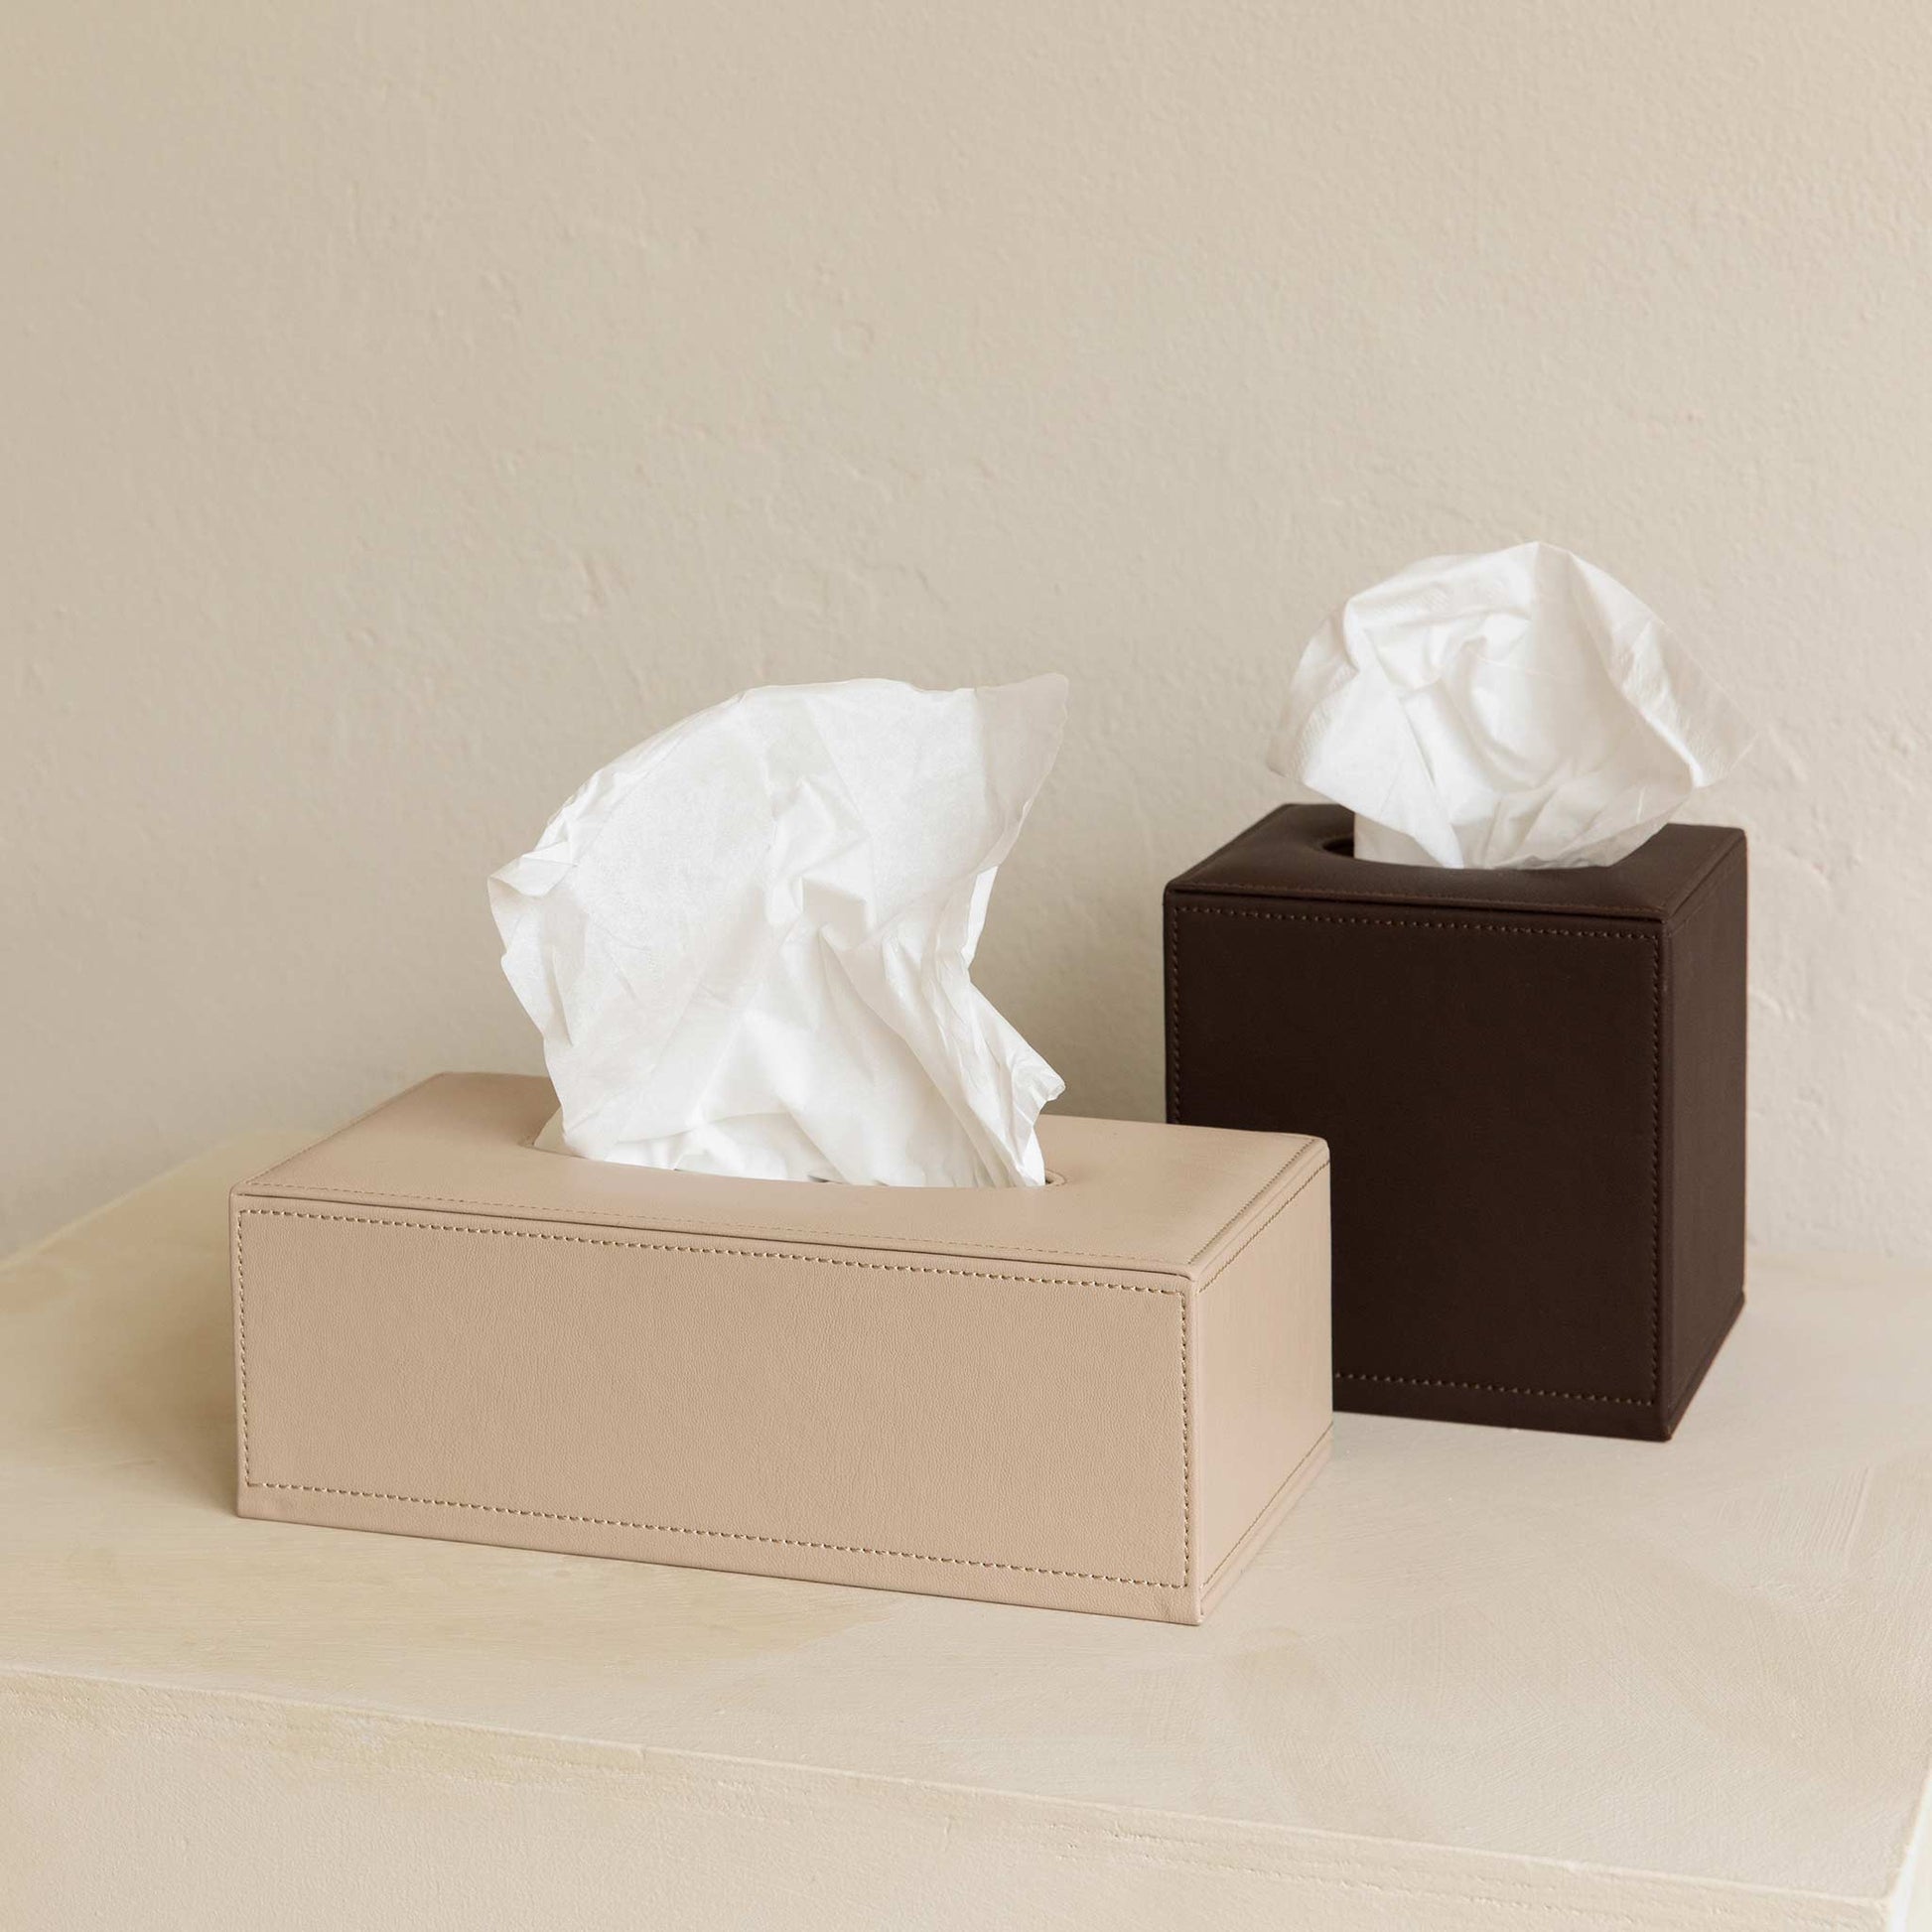 Luxury tissue box covers in leather